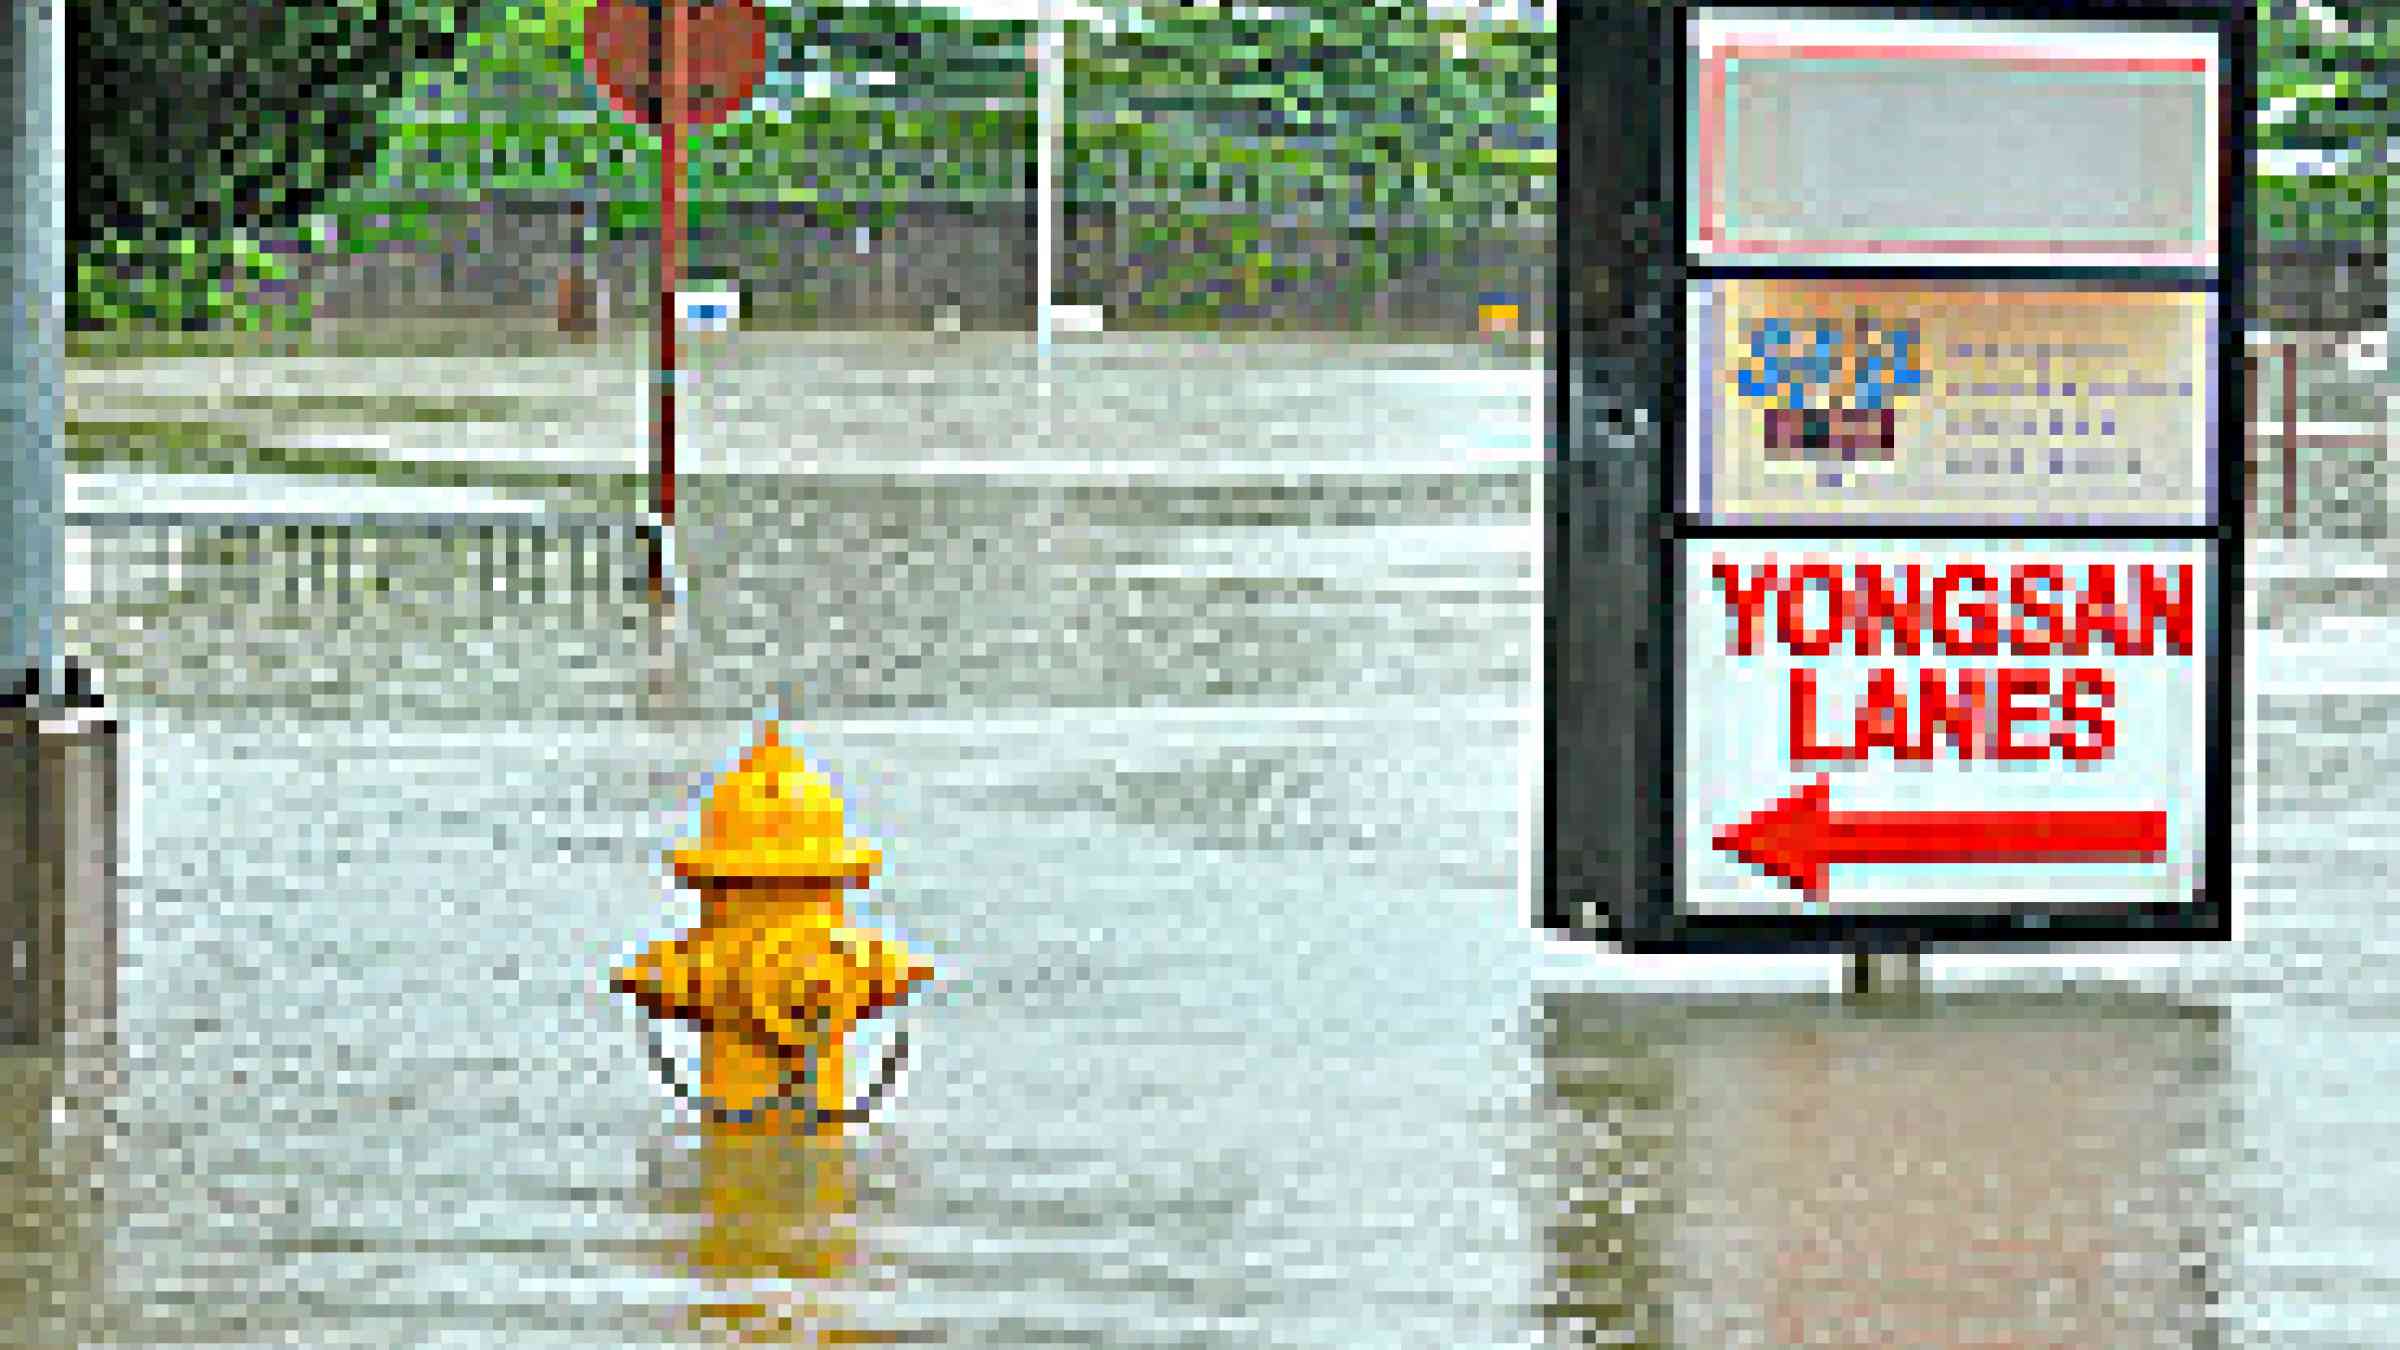 Floods in Yongsan, Republic of Korea, by Flickr user usag.yongsan, Creative Commons Attribution-NonCommercial-ShareAlike 2.0 Generic http://www.flickr.com/photos/usag-yongsan/5010813197/